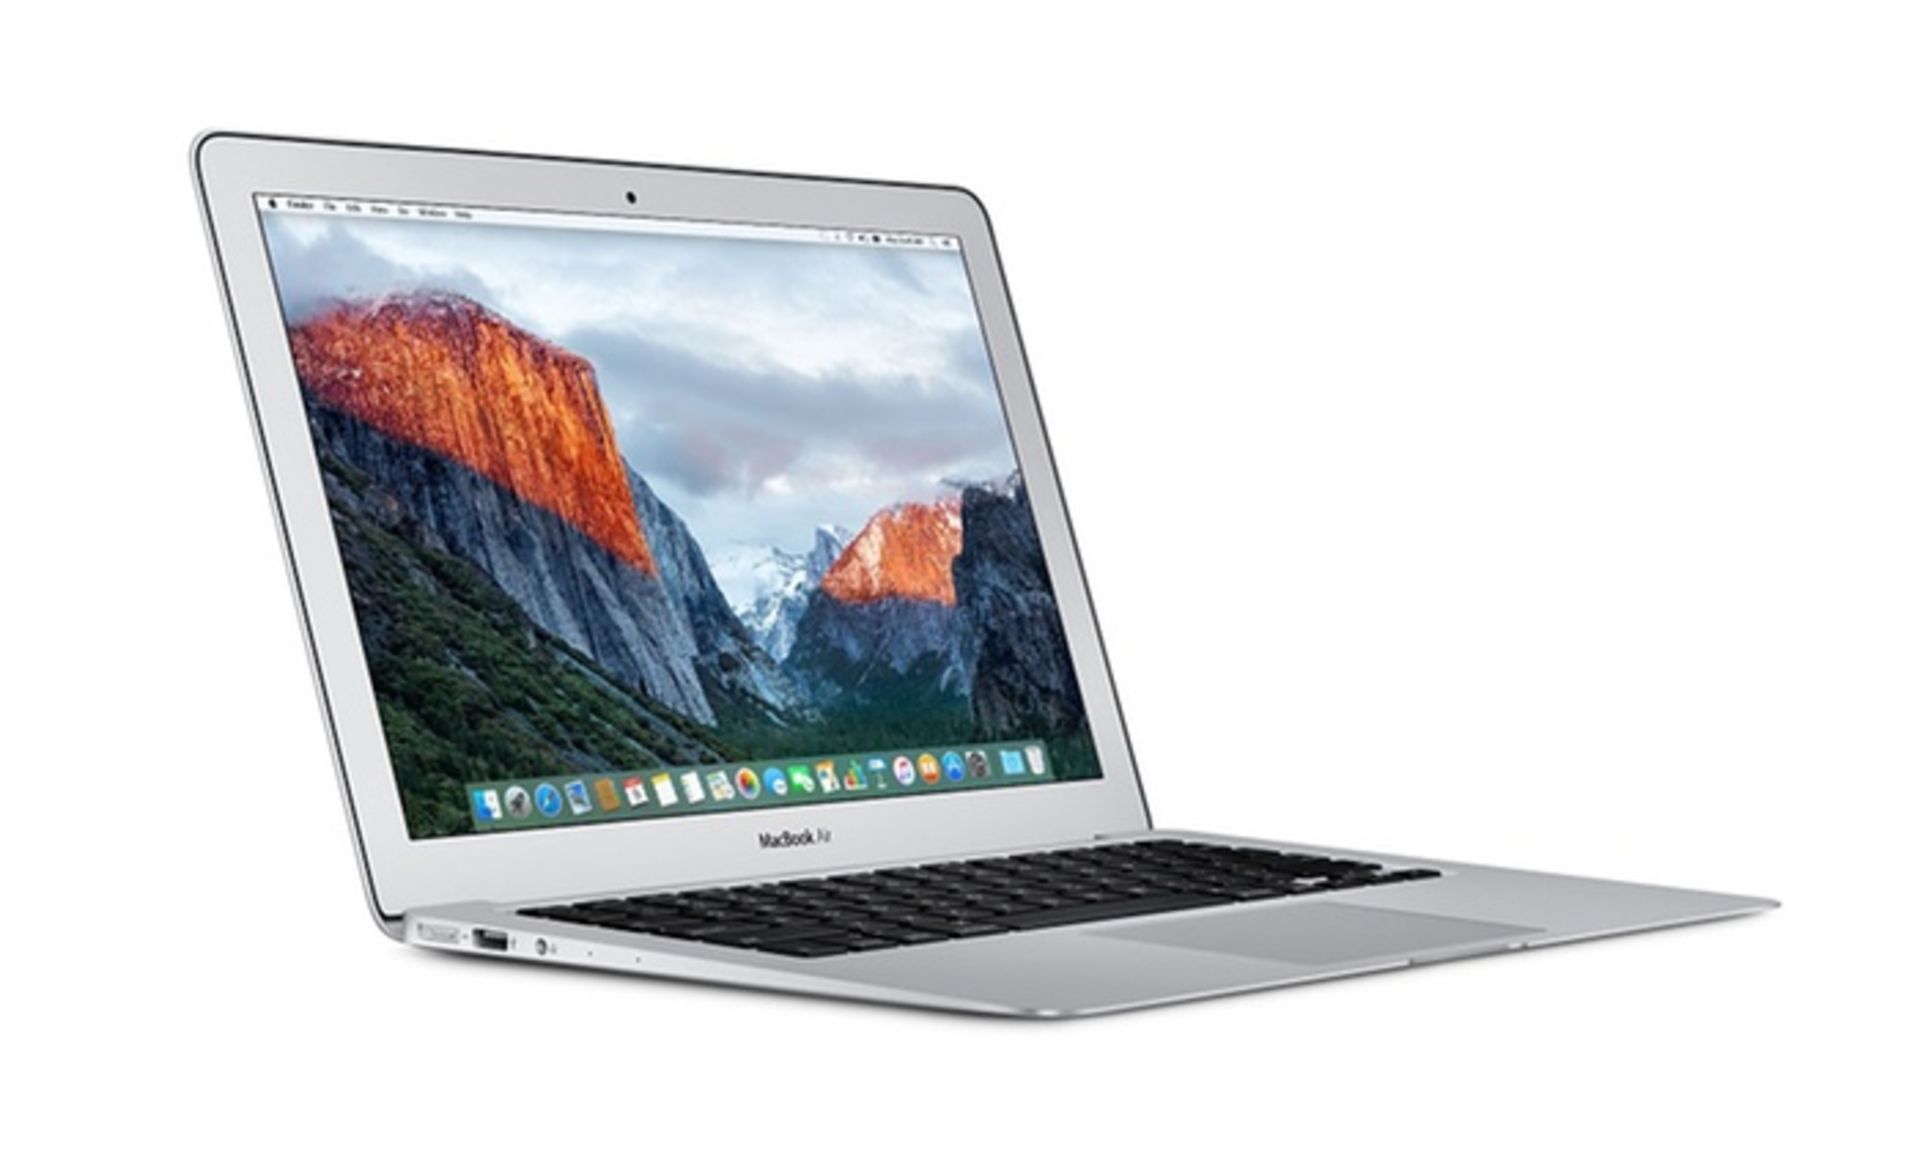 V Brand New Apple MacBook Air A1466 13.3" - Core i5 - 8GB - 128GB SSD - Box Open But Item Is Brand